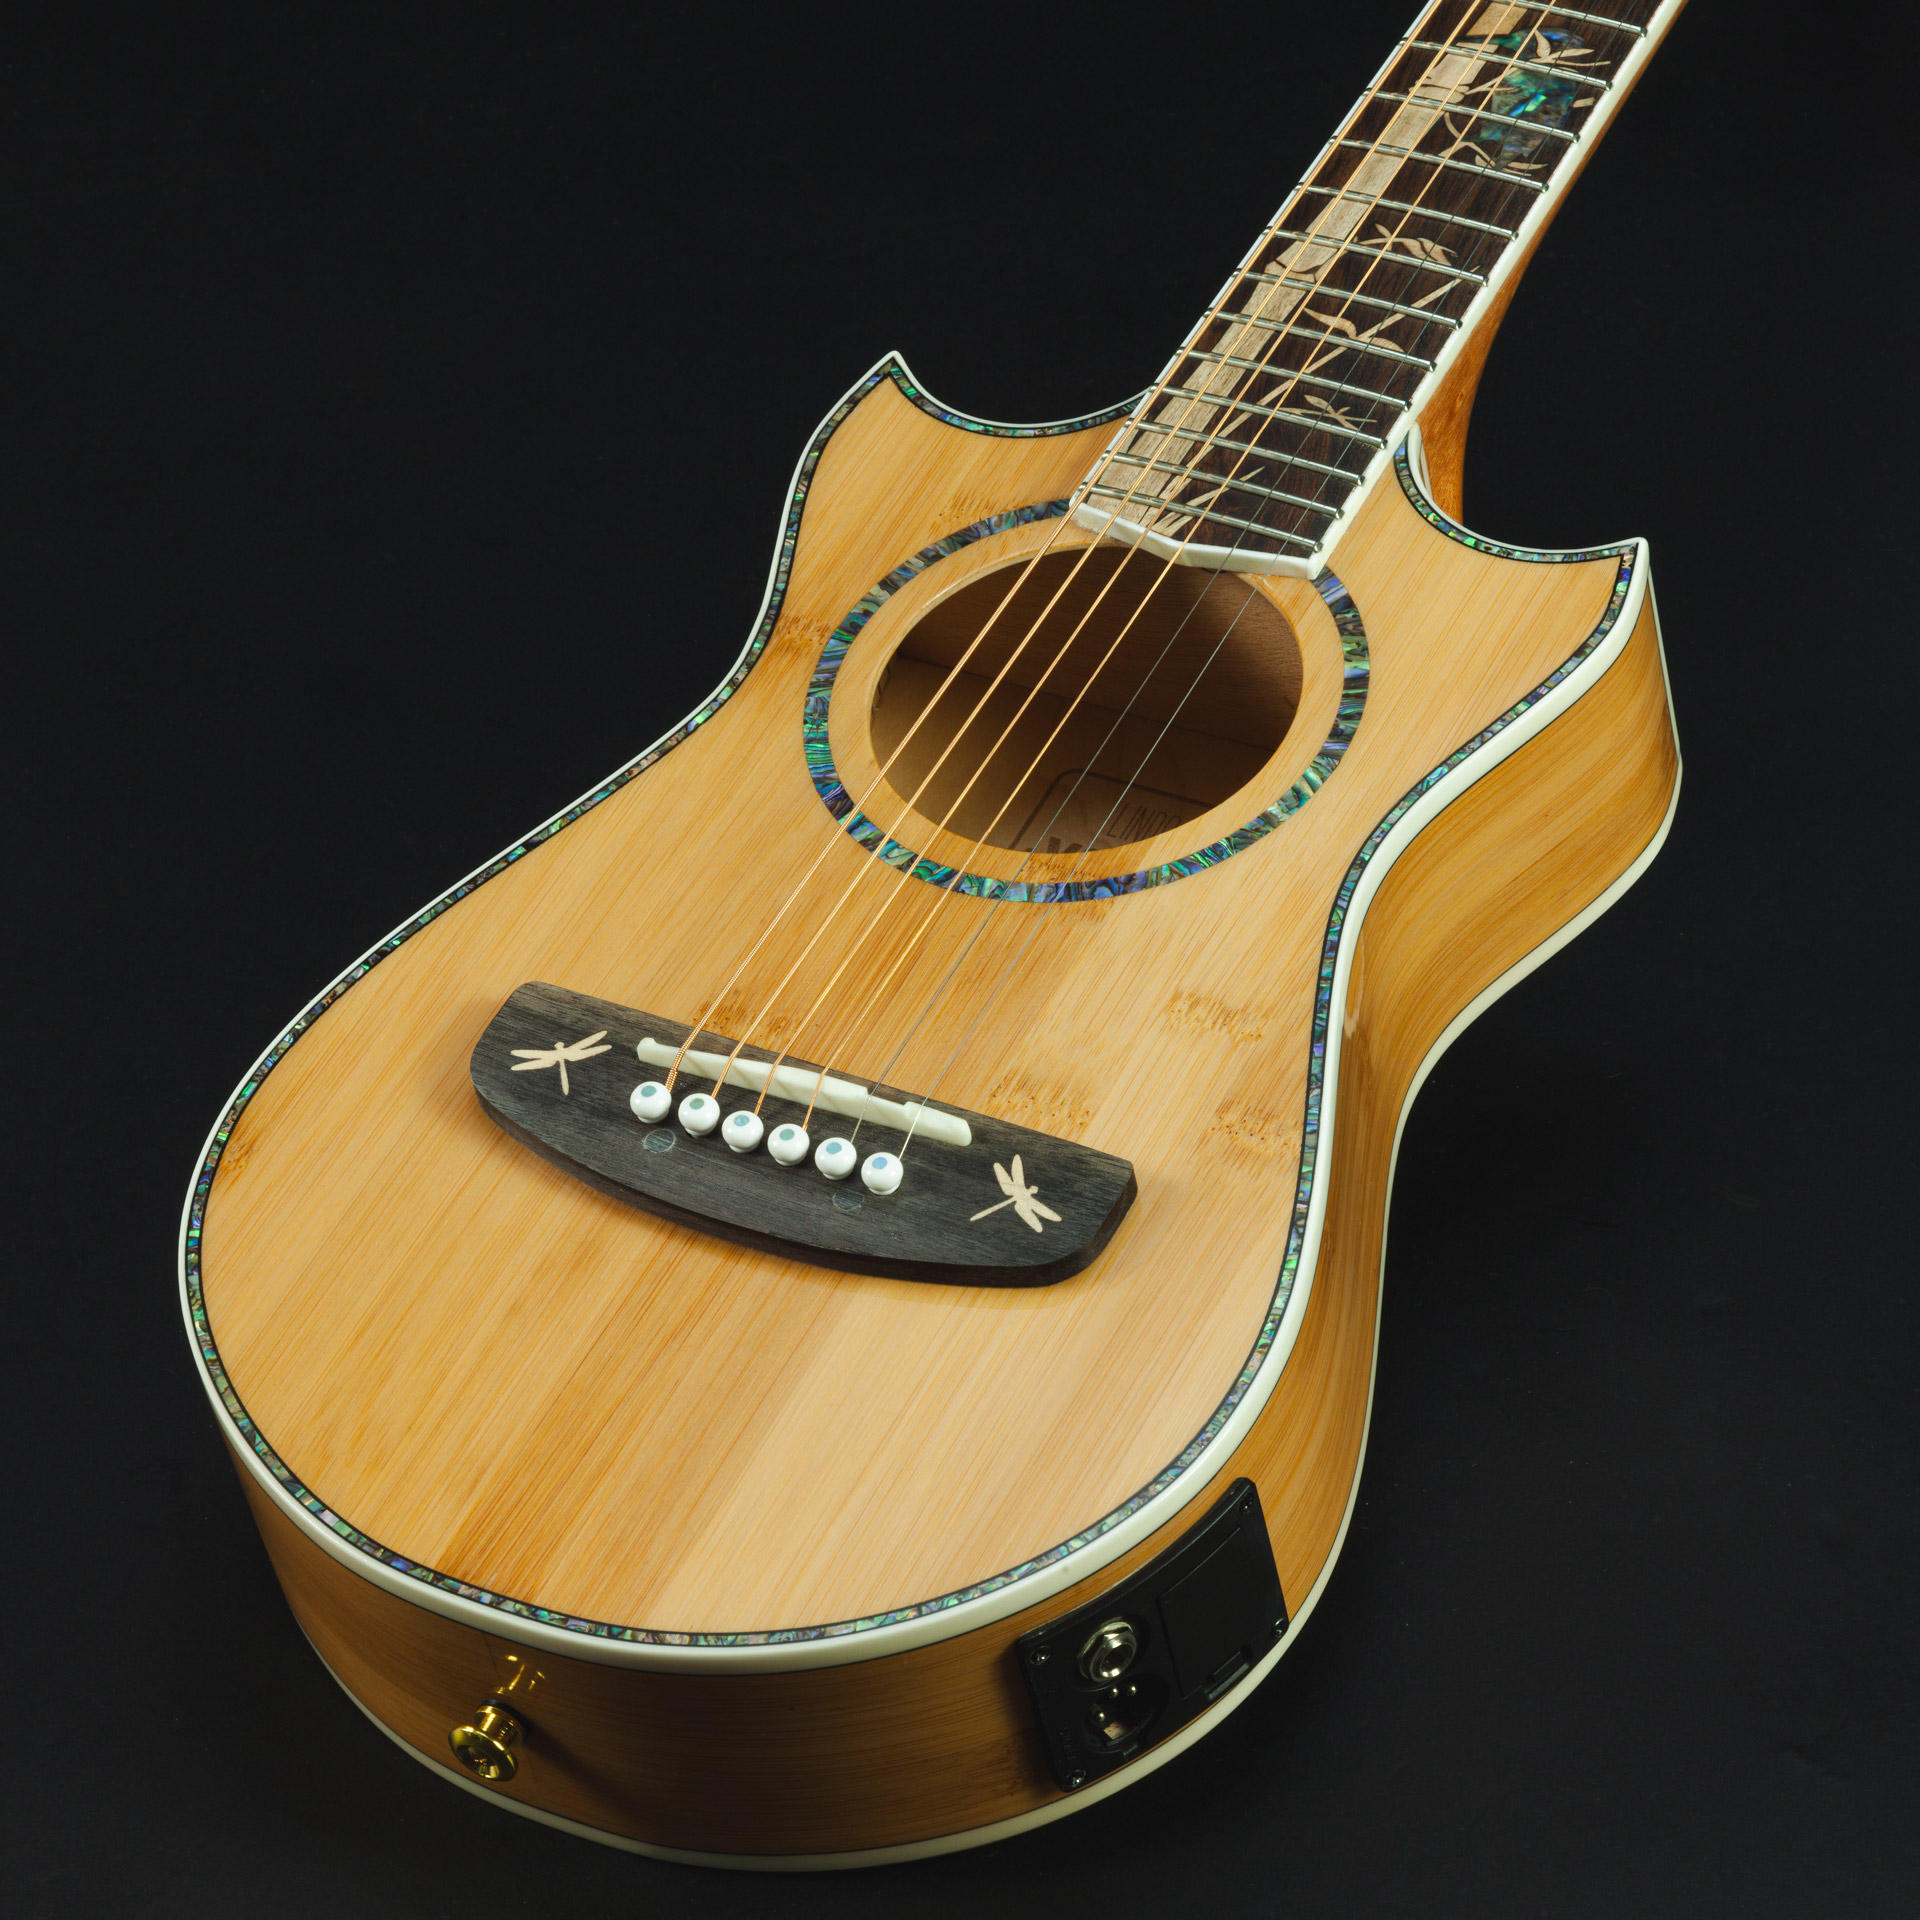 Lindo-Bamboo-Voyager-V2-Electro-Acoustic-Travel-Guitar-Body